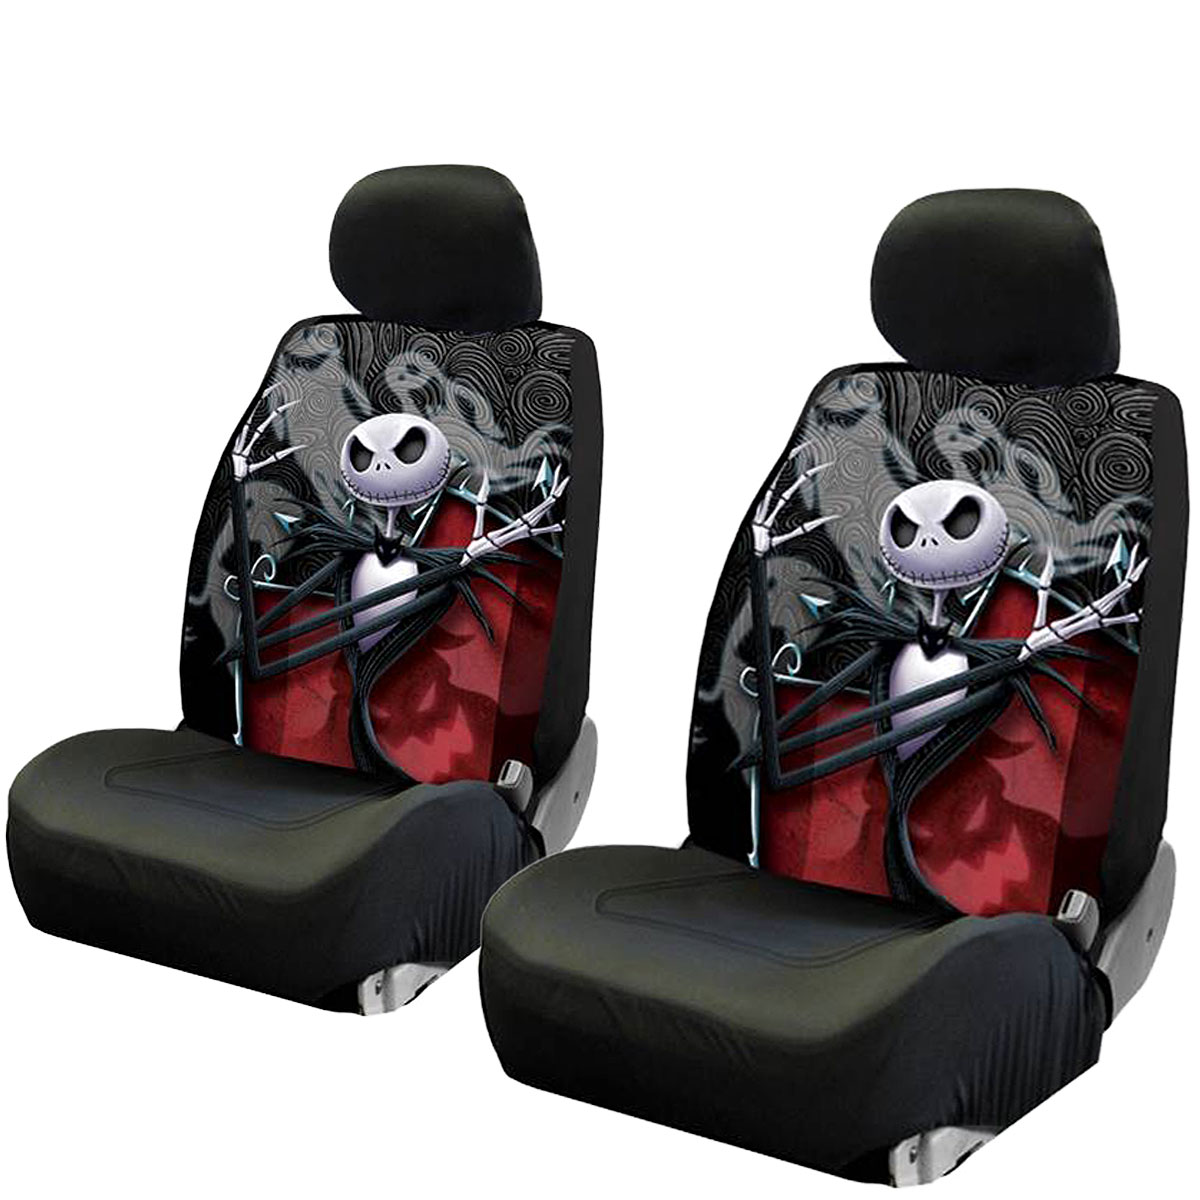 YupbizAuto New Nightmare Before Christmas Jack Skellington Ghostly Car, Truck, SUV Seat Covers Headrest Covers Set with Air Freshener - image 2 of 7